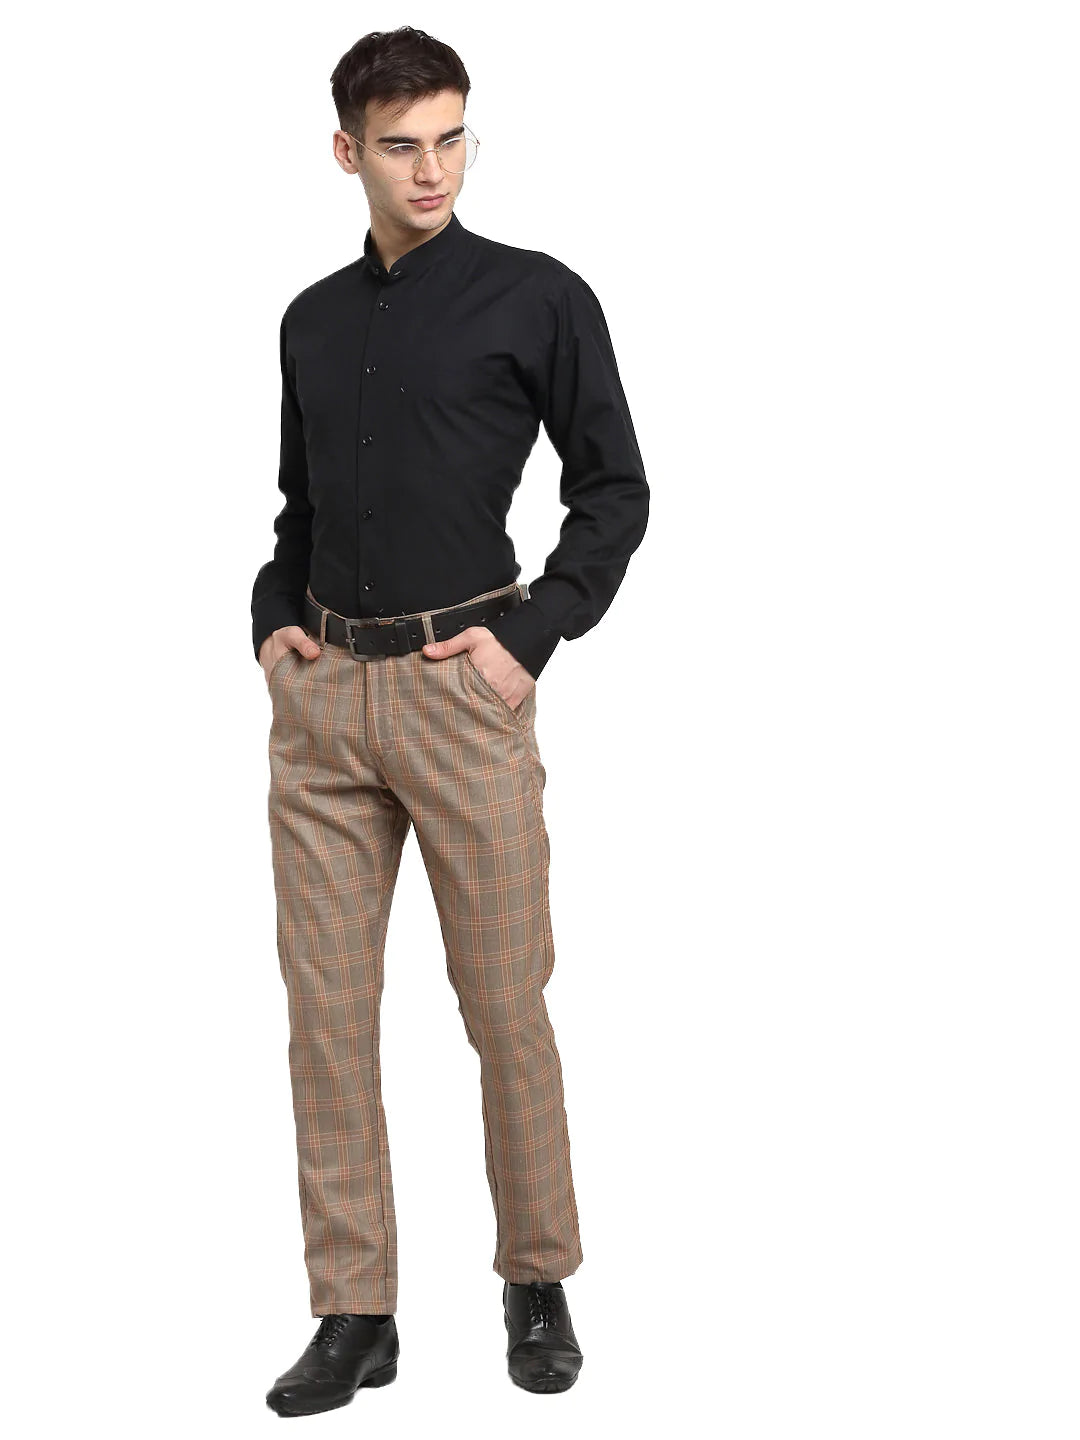 Jainish Men's Brown Cotton Checked Formal Trousers ( FGP 267Brown )